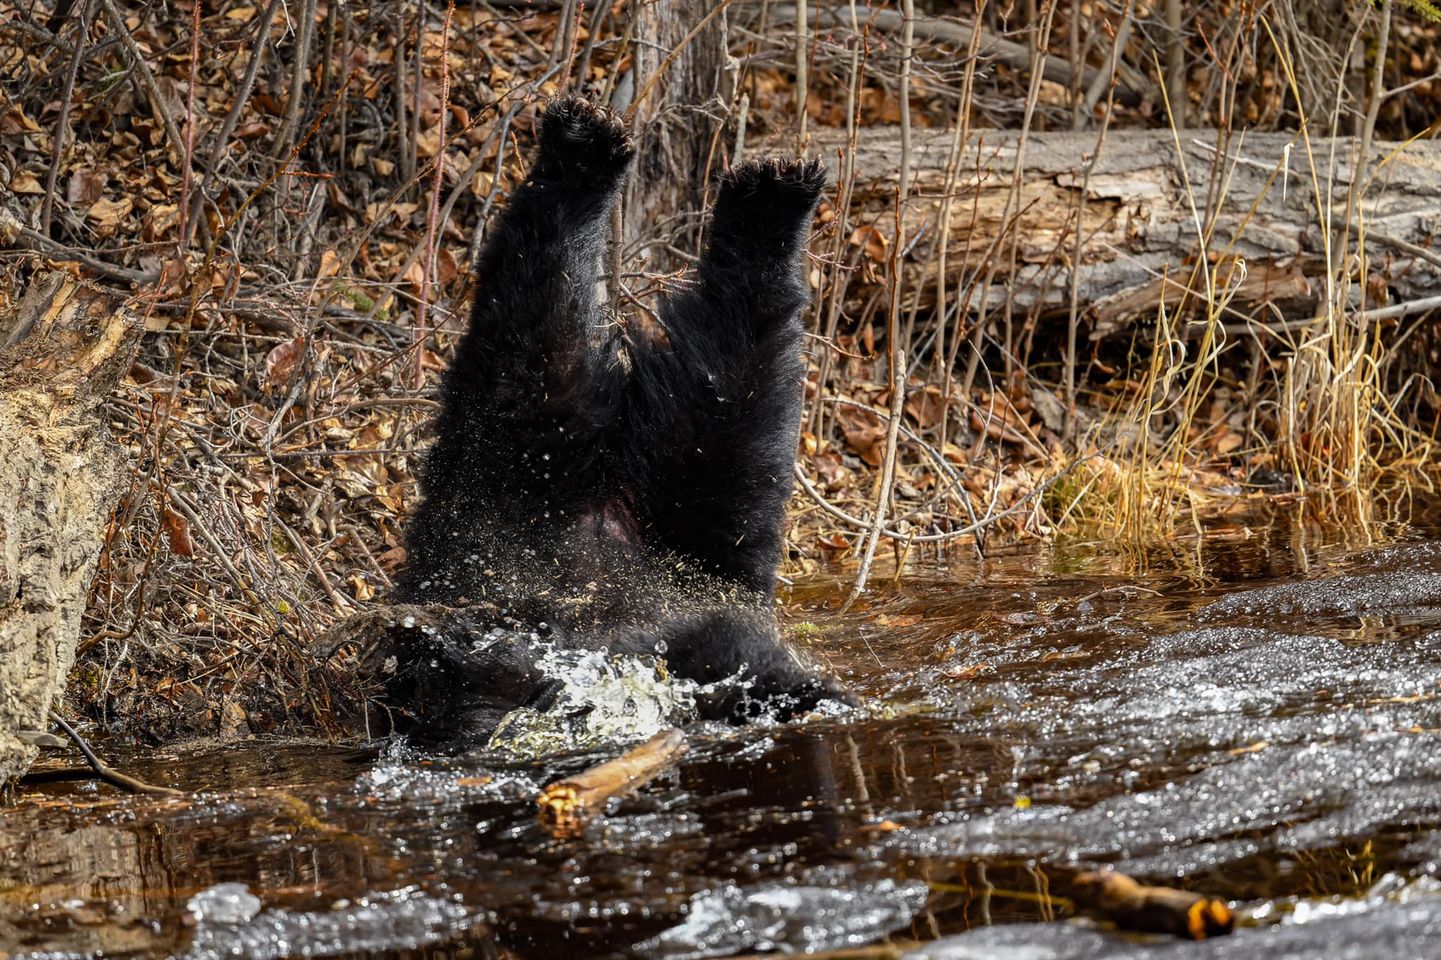 The napping black bear goes head first into the drink. 